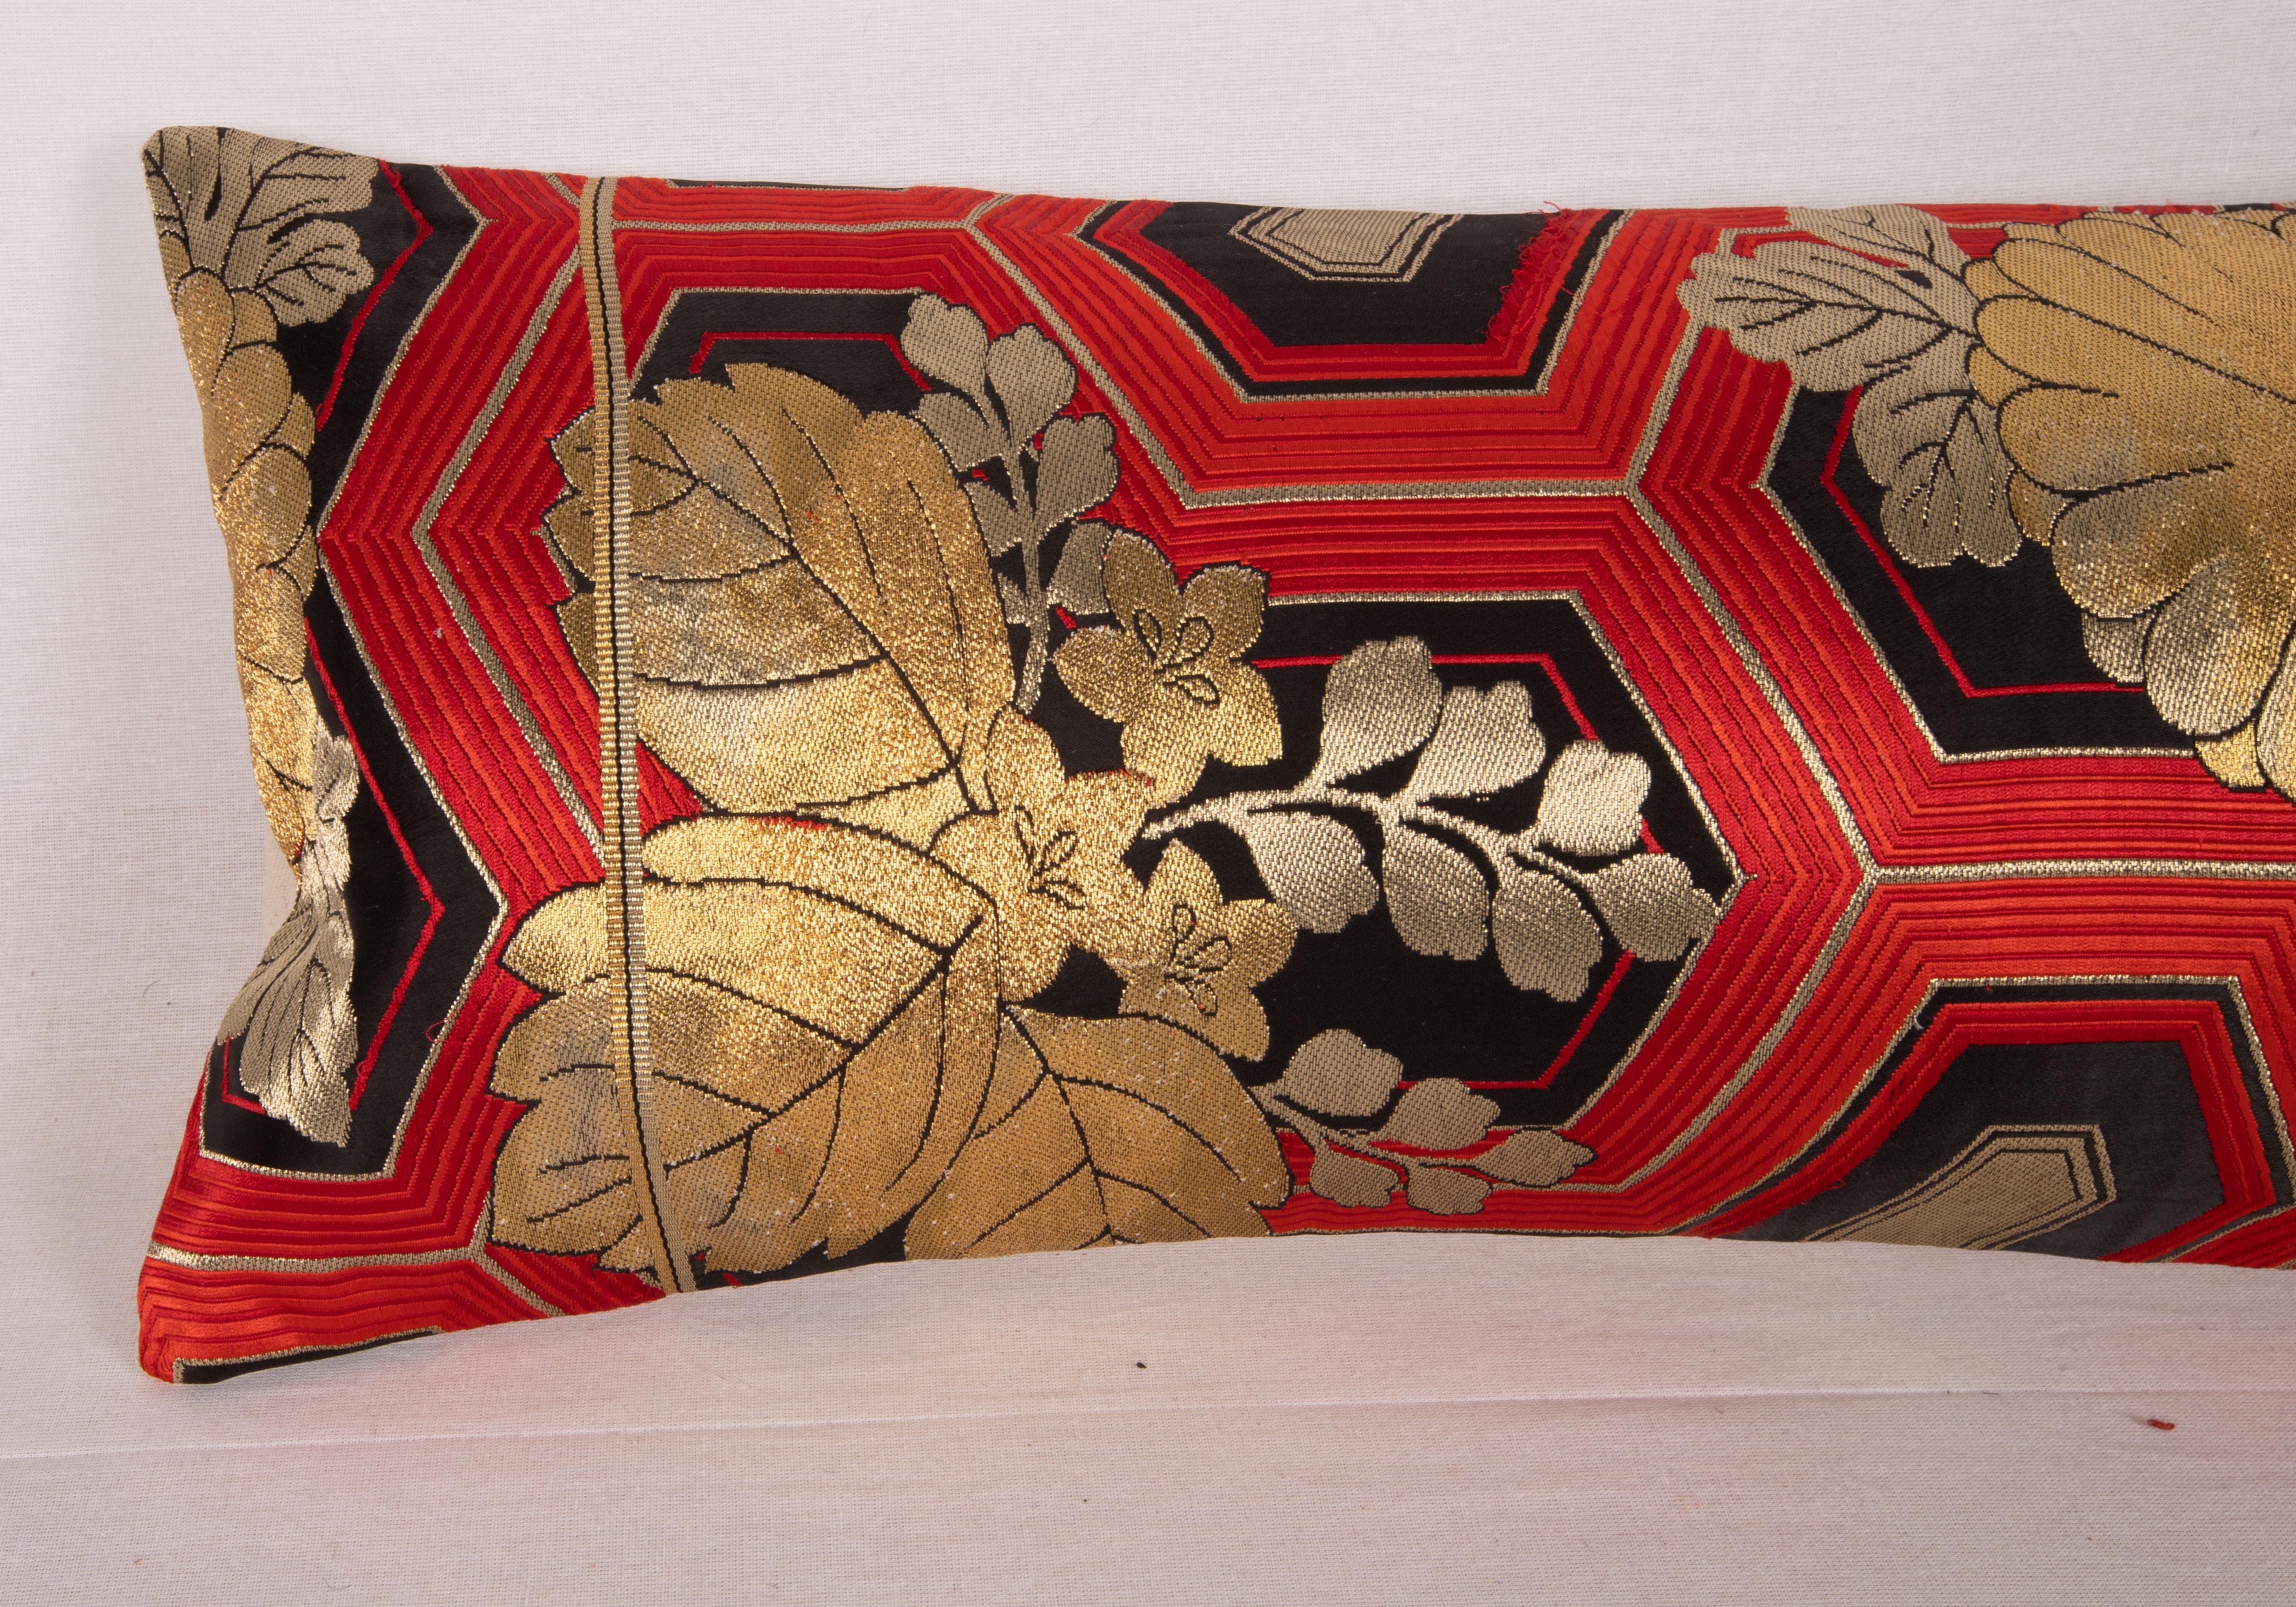 20th Century Obi Pillow Cover, Japan, Mid 20th C. For Sale